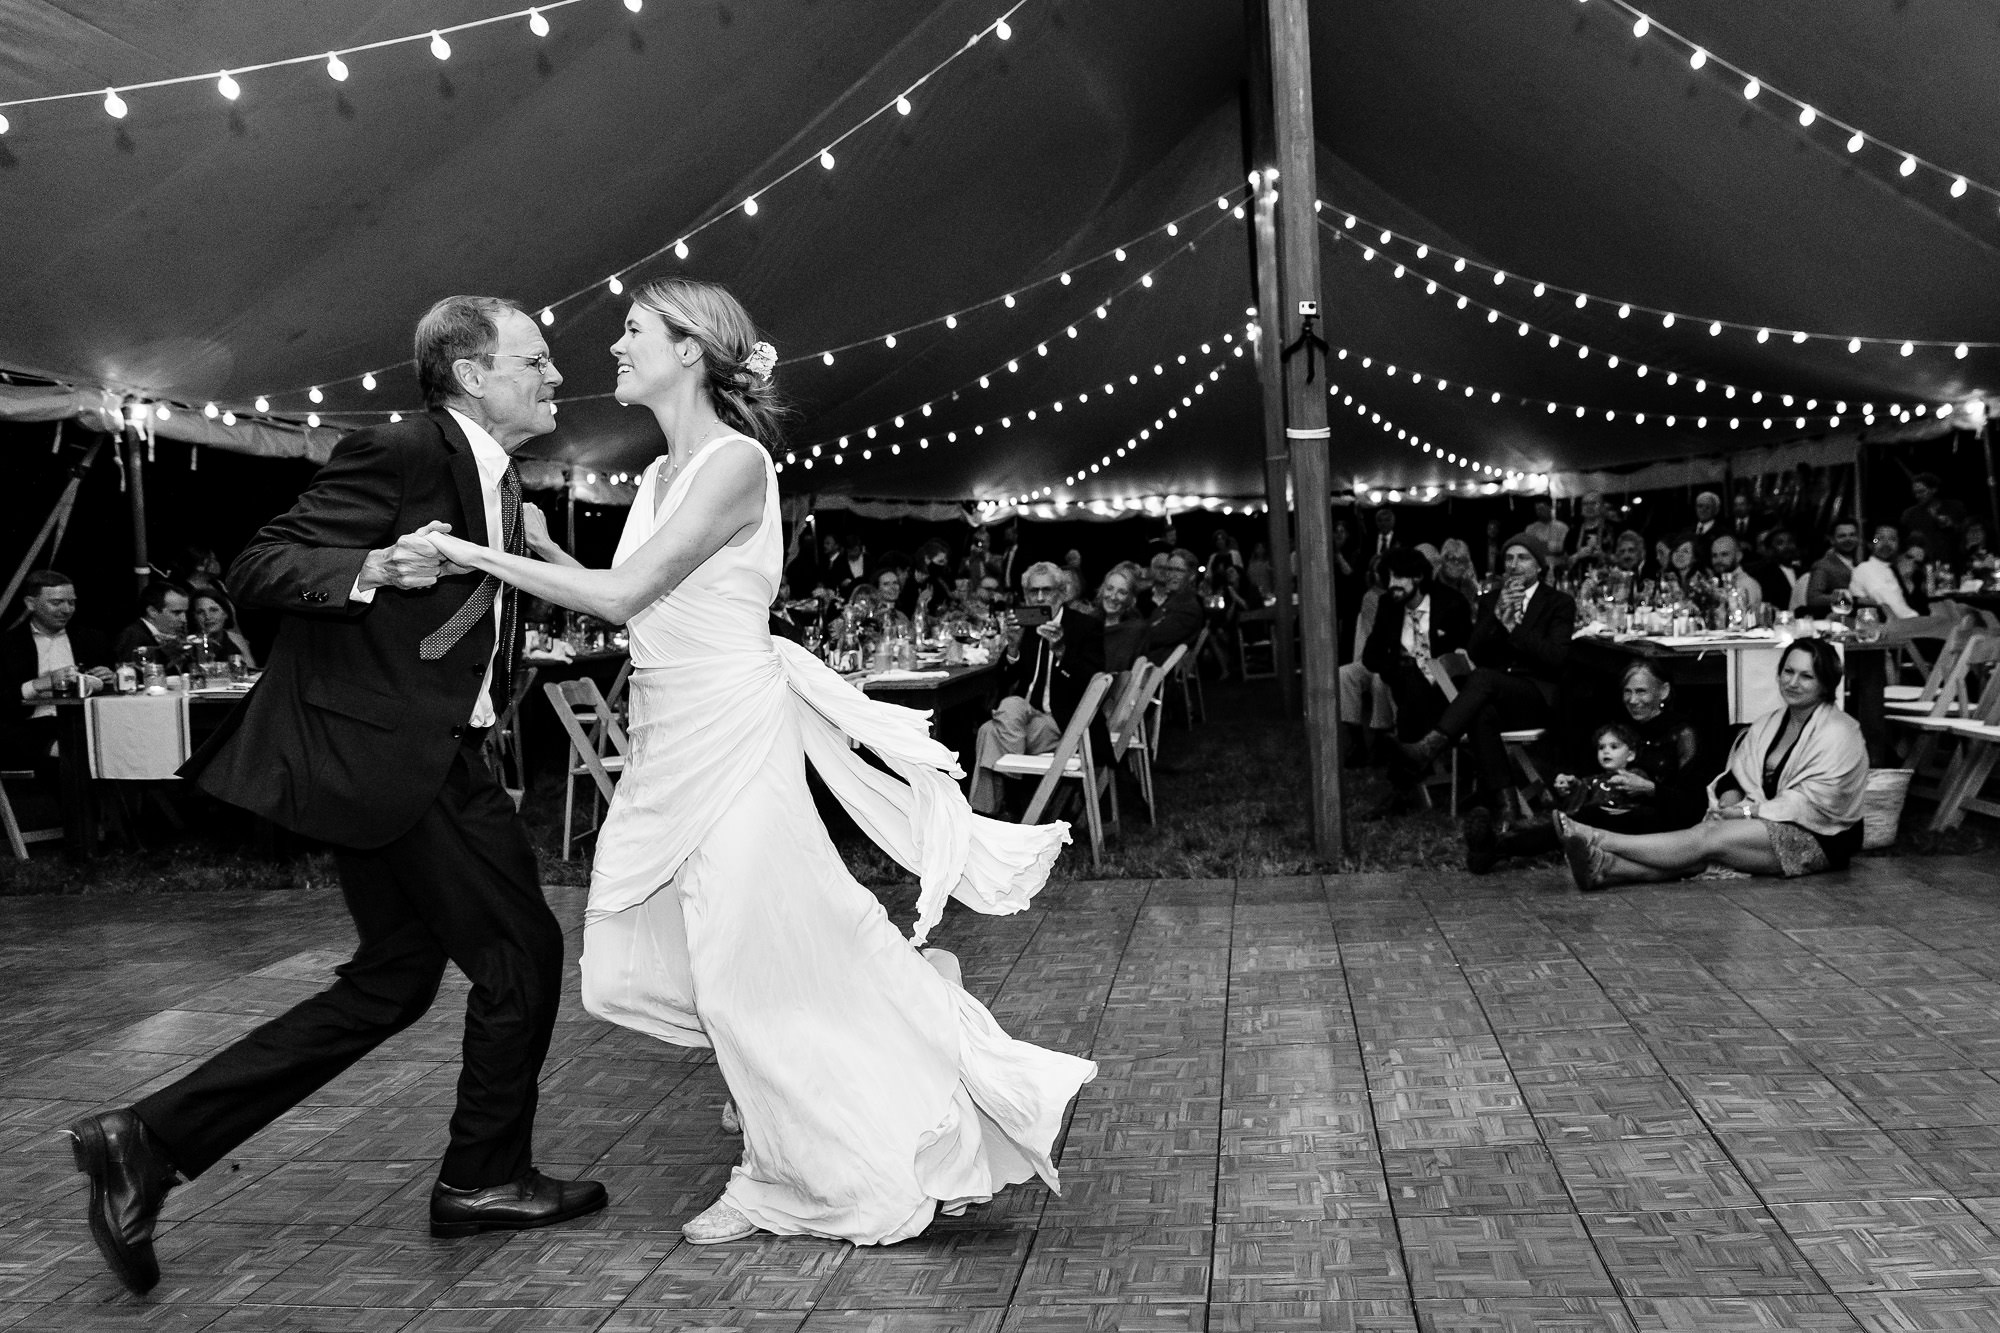 A tented wedding reception by the ocean in Blue Hill, Maine